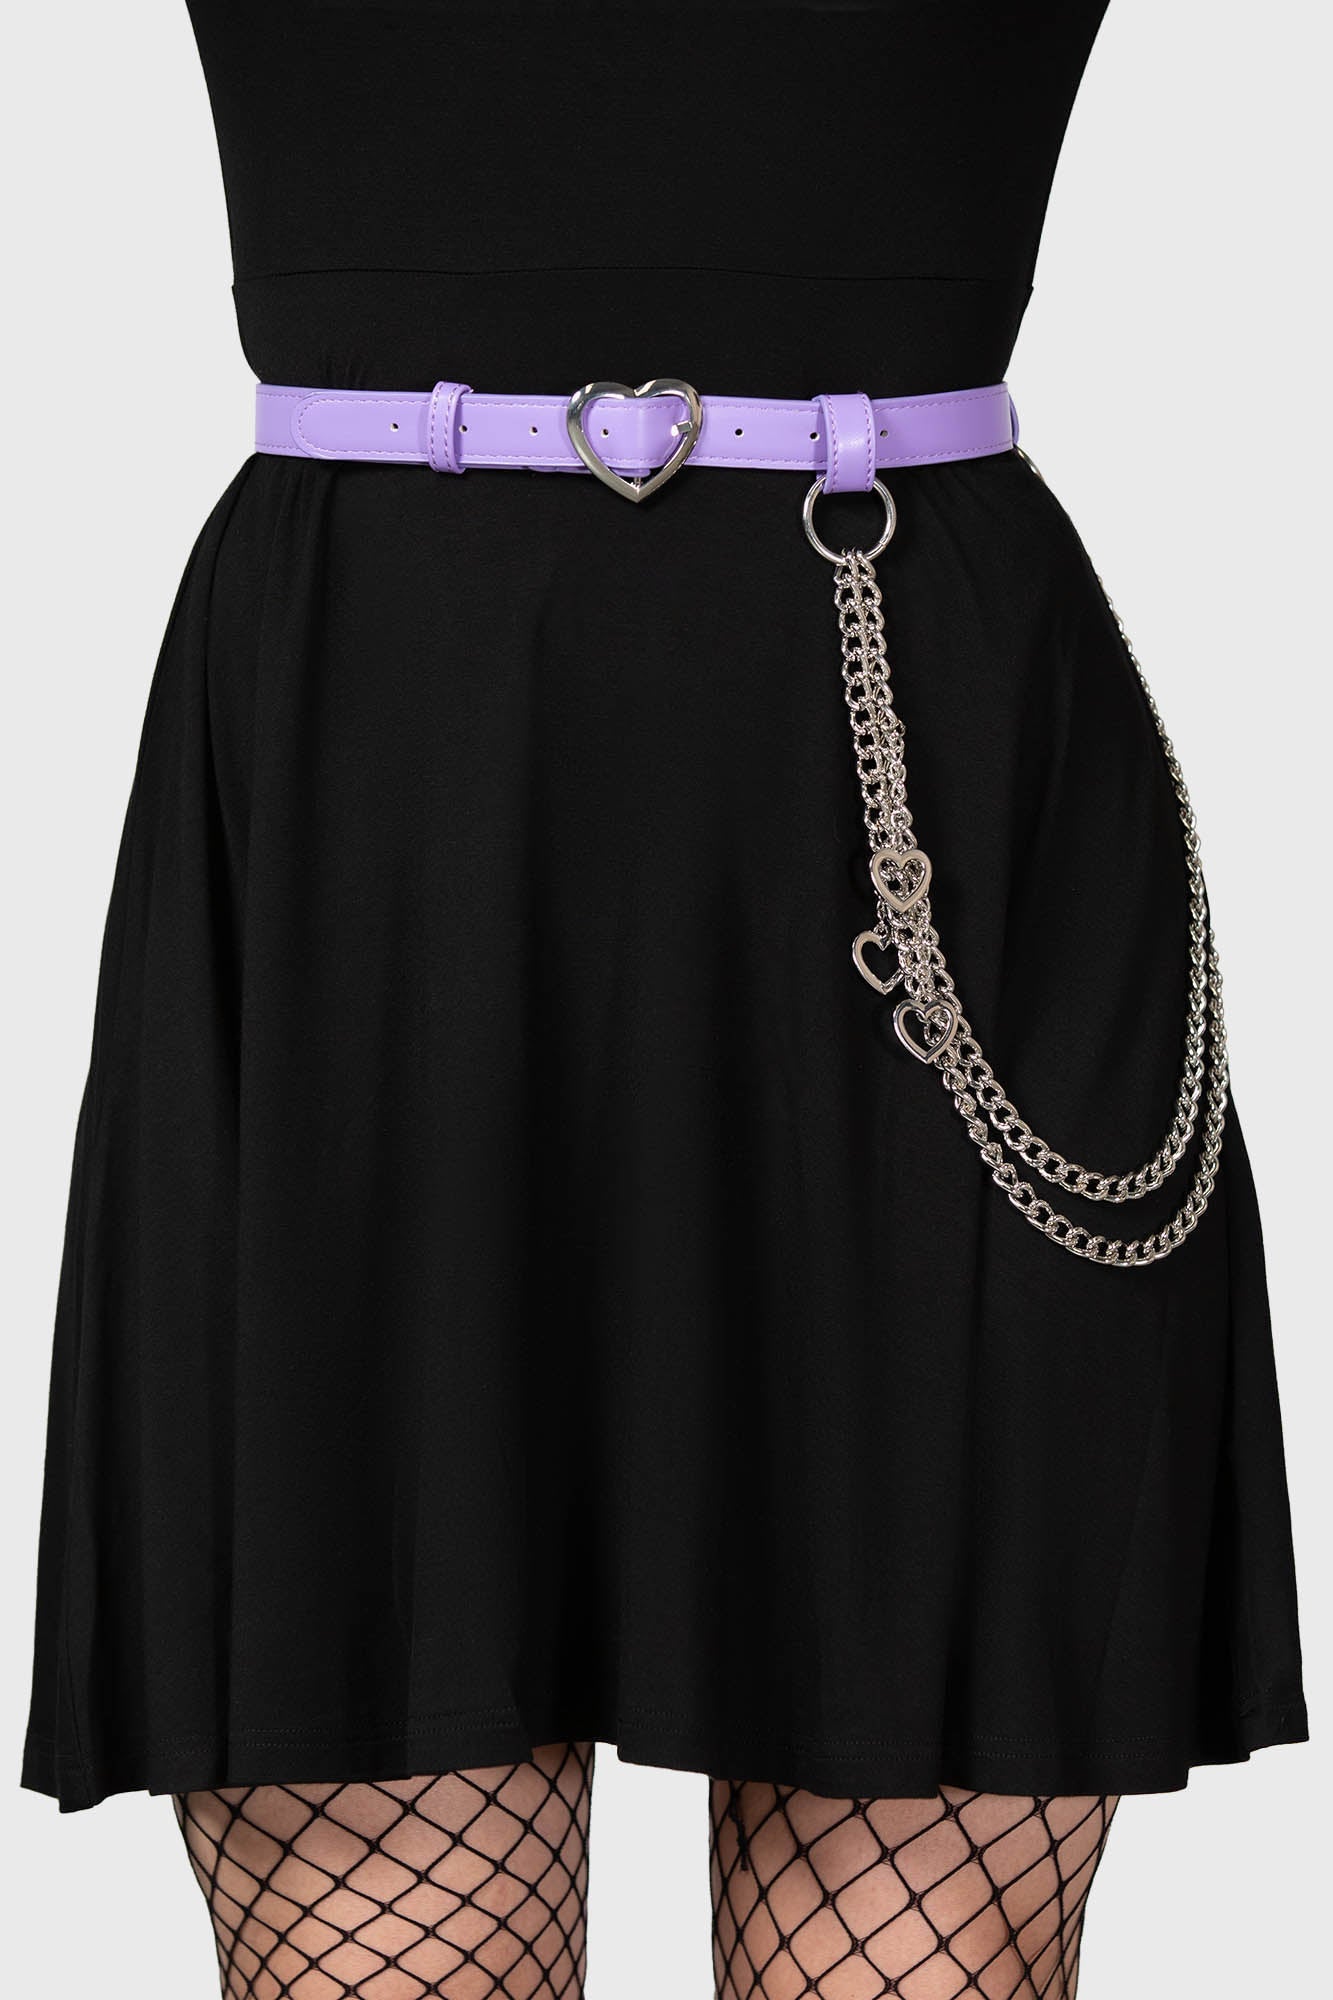 ASOS Asos Heart Shape Buckle Belt with Chain Detail in Black